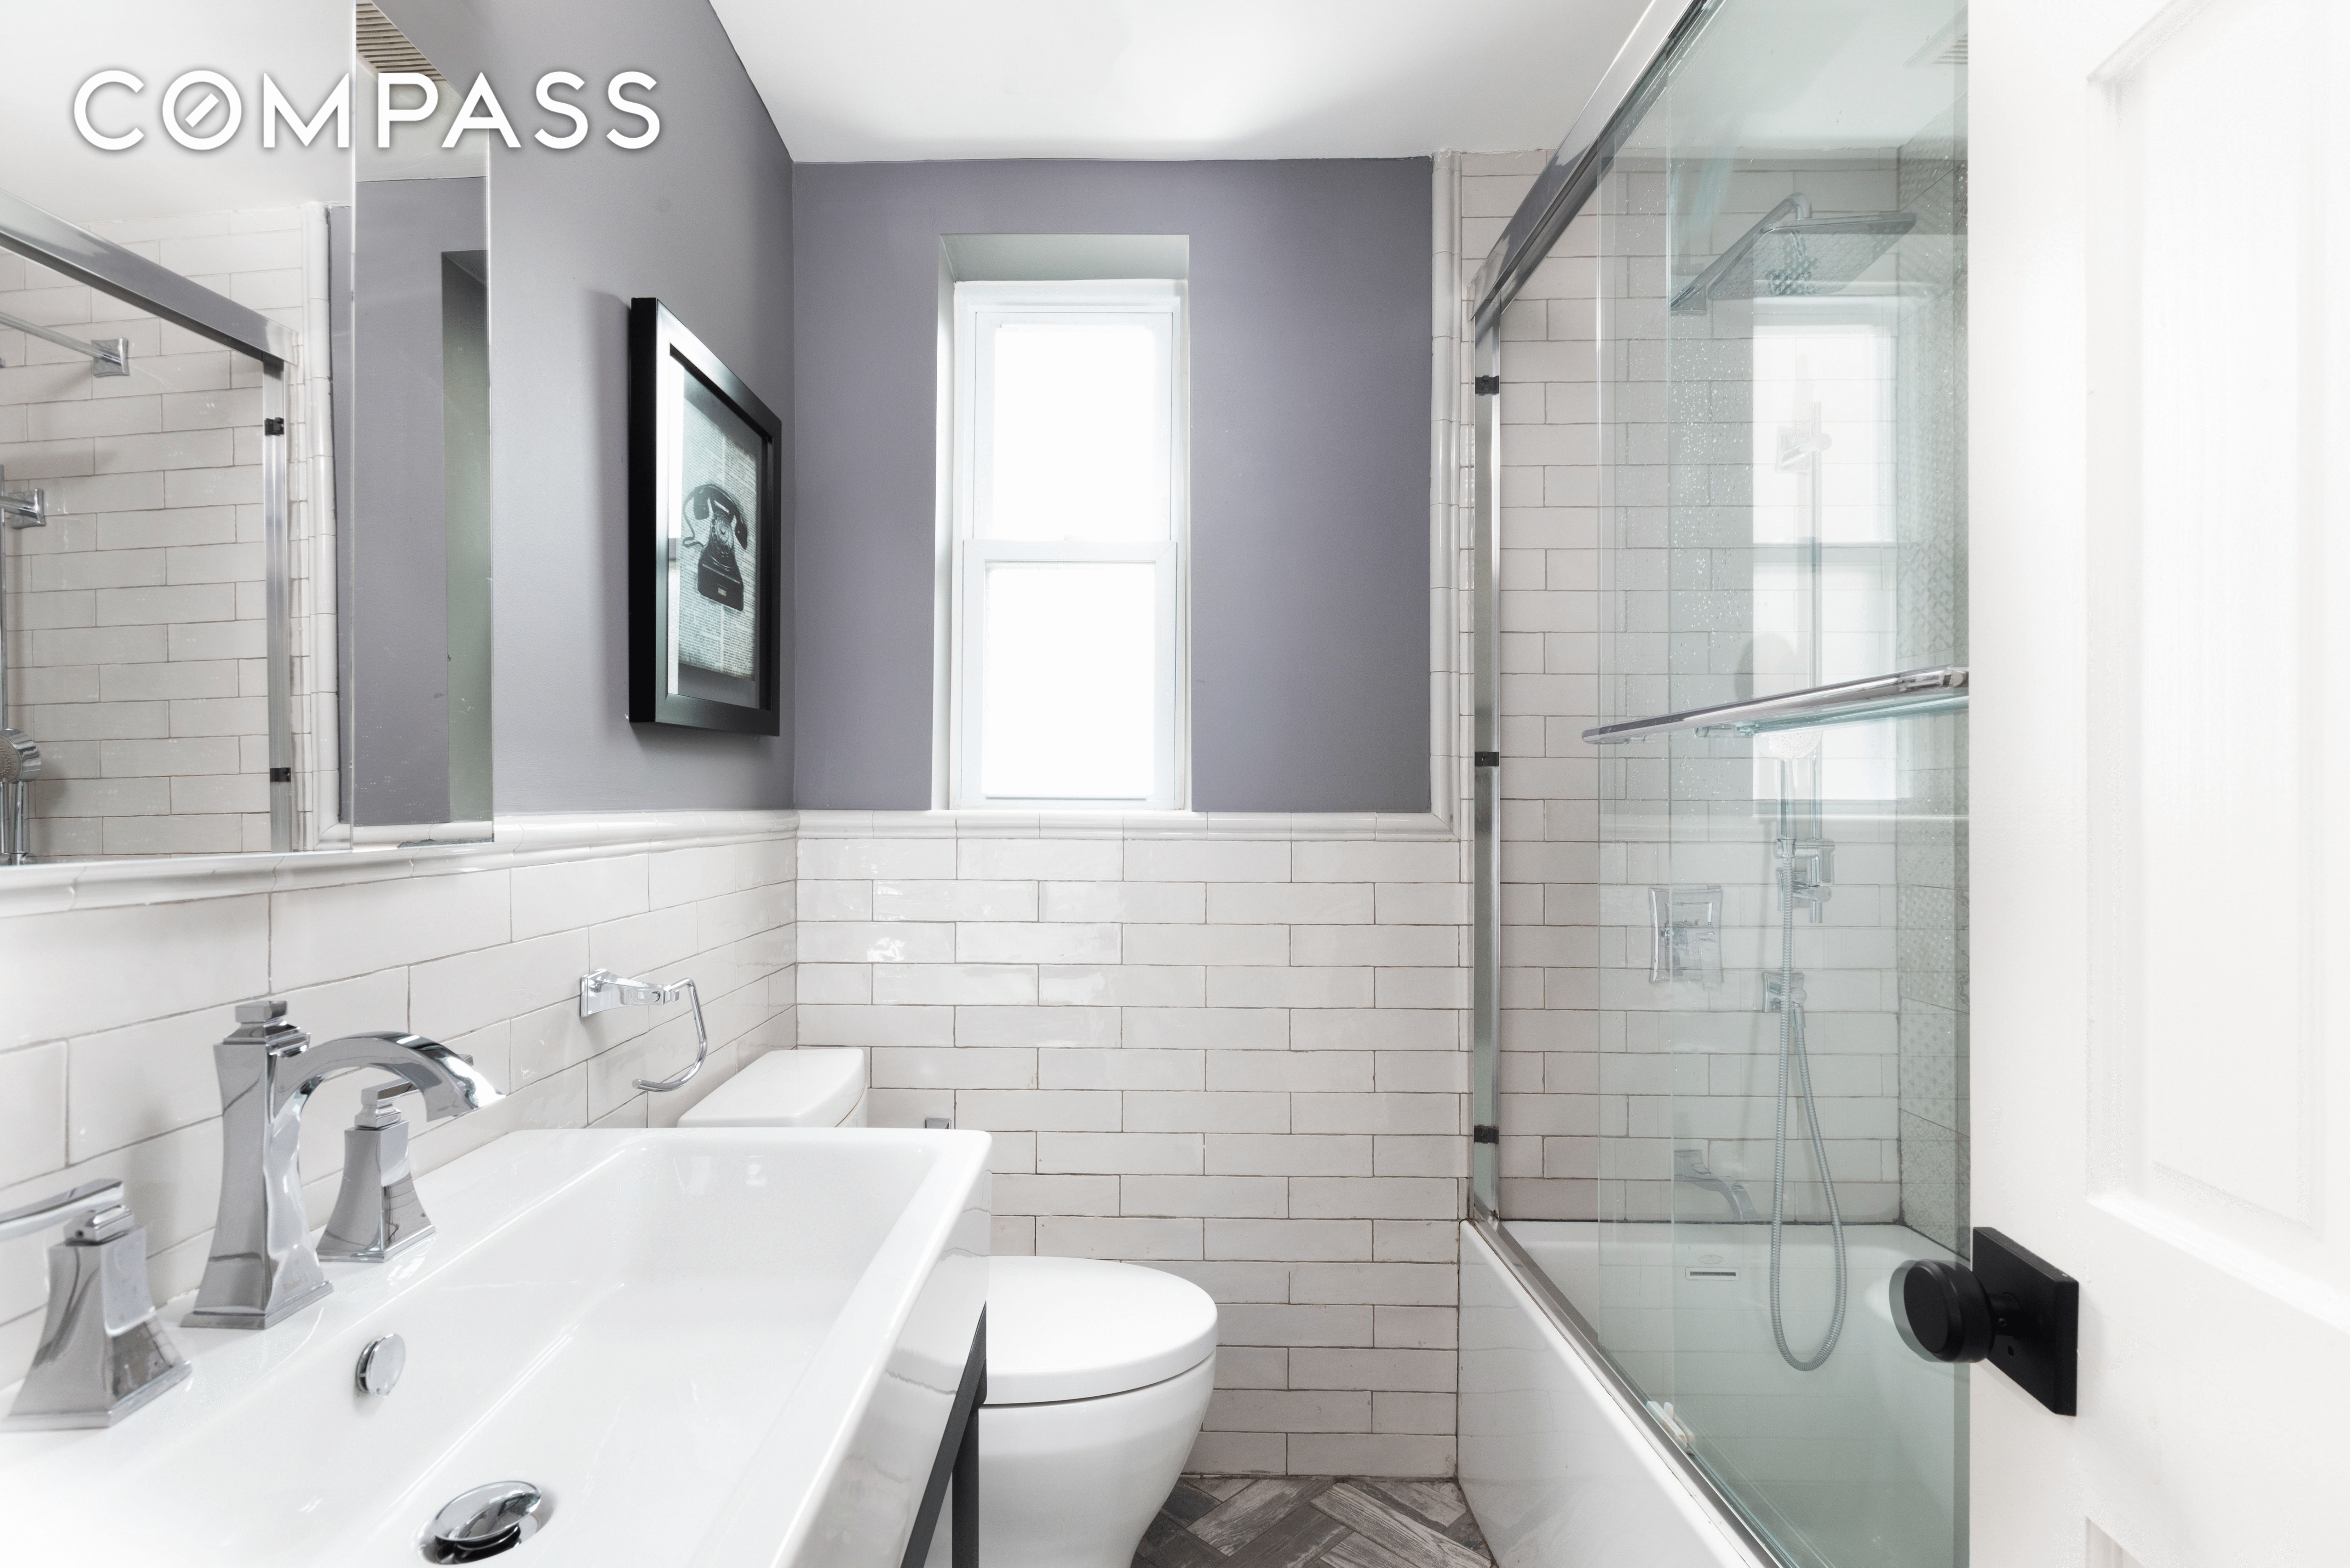 a bathroom with white fixtures, glass shower doors and white subway tile walls